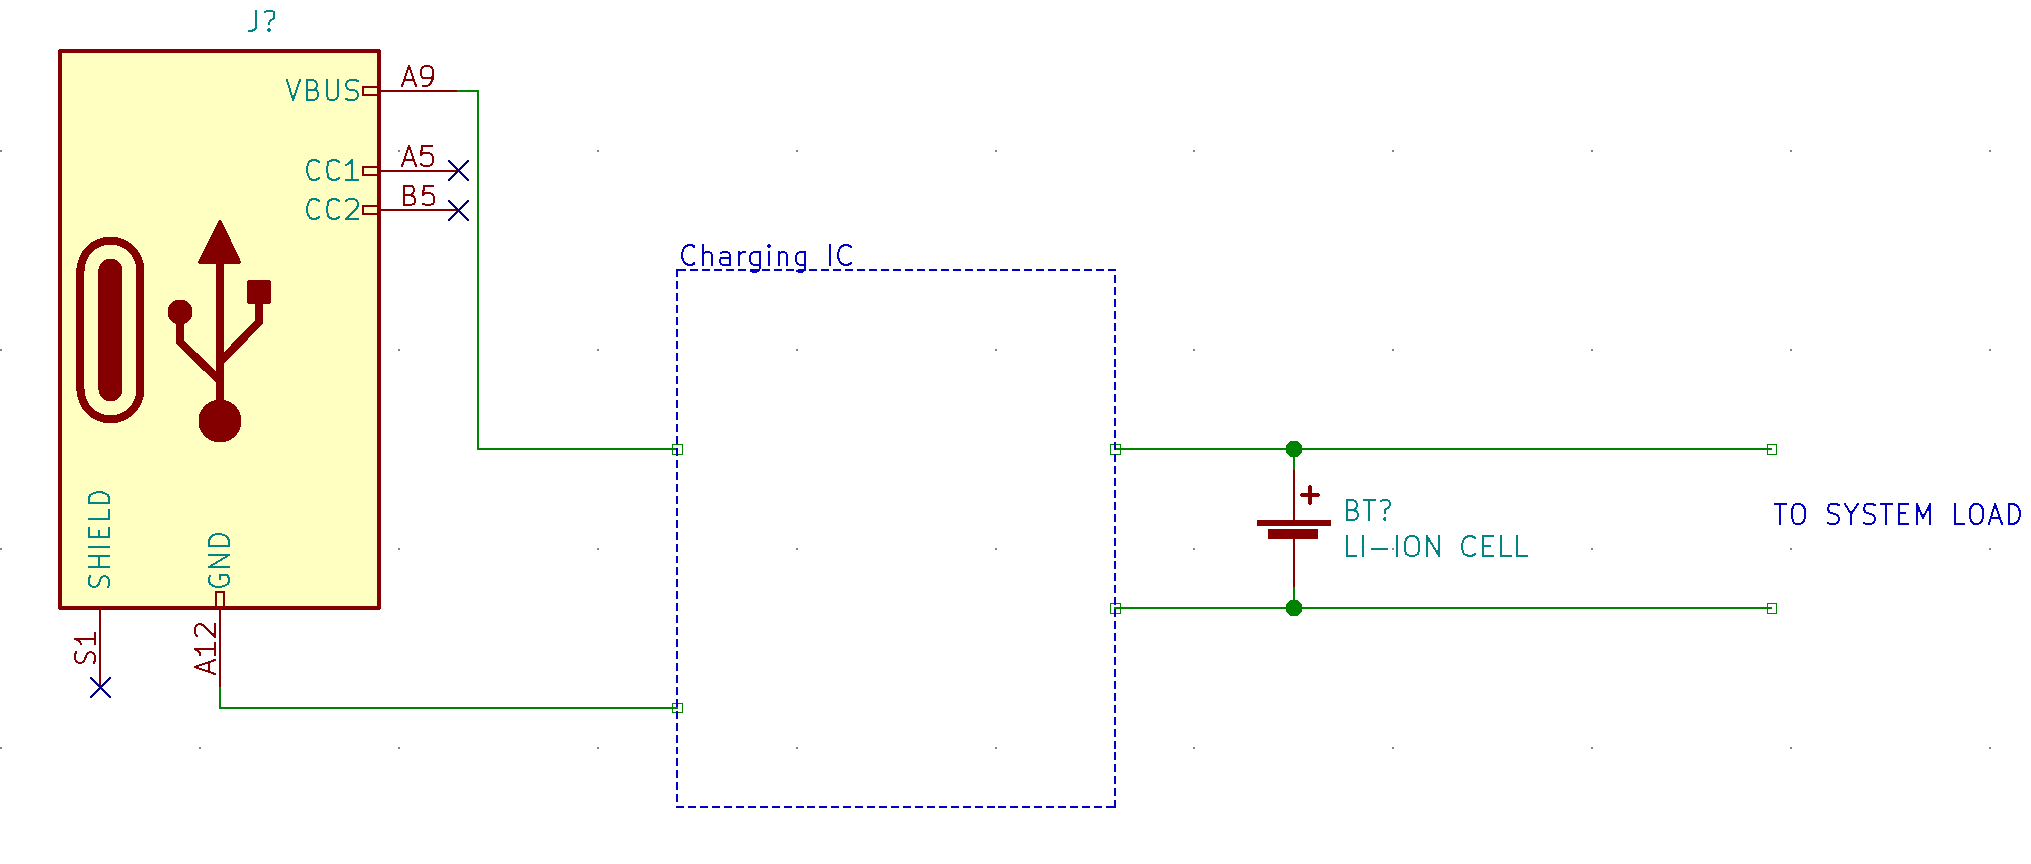 Lithium Ion Battery Charger Circuit: Load Sharing - MicroType Engineering